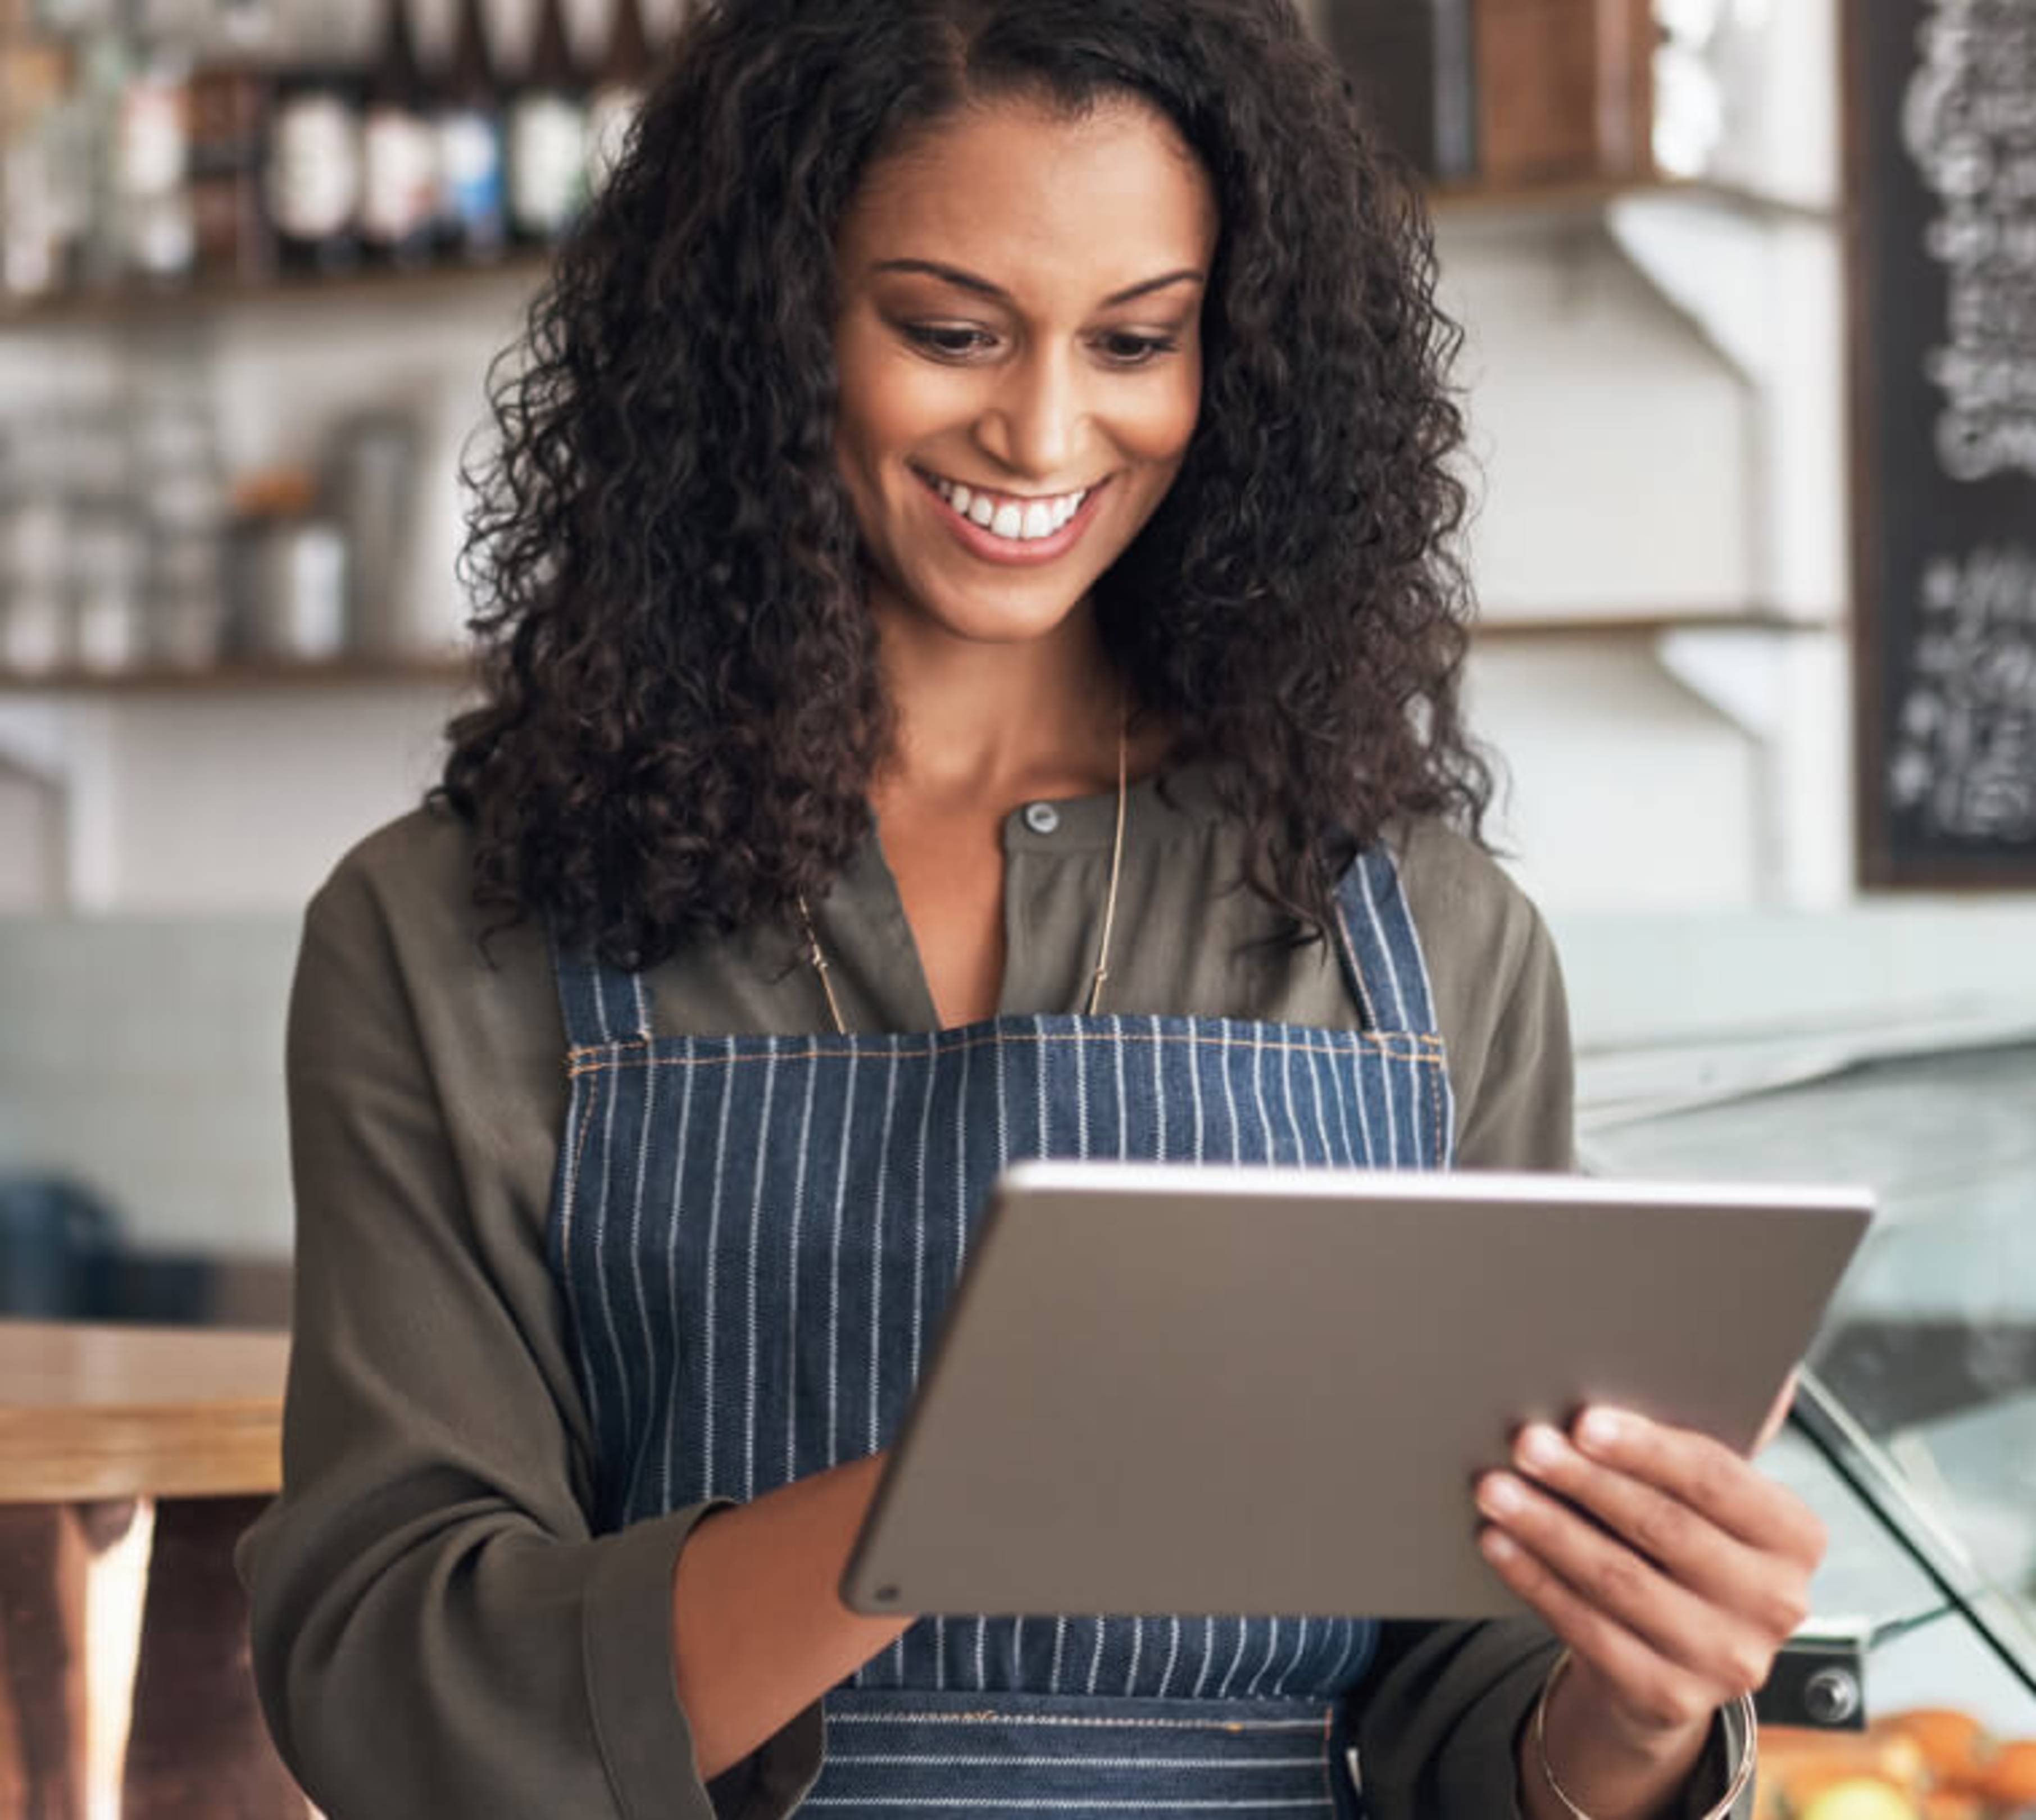 7 Restaurant Technology Products That Improve Operations